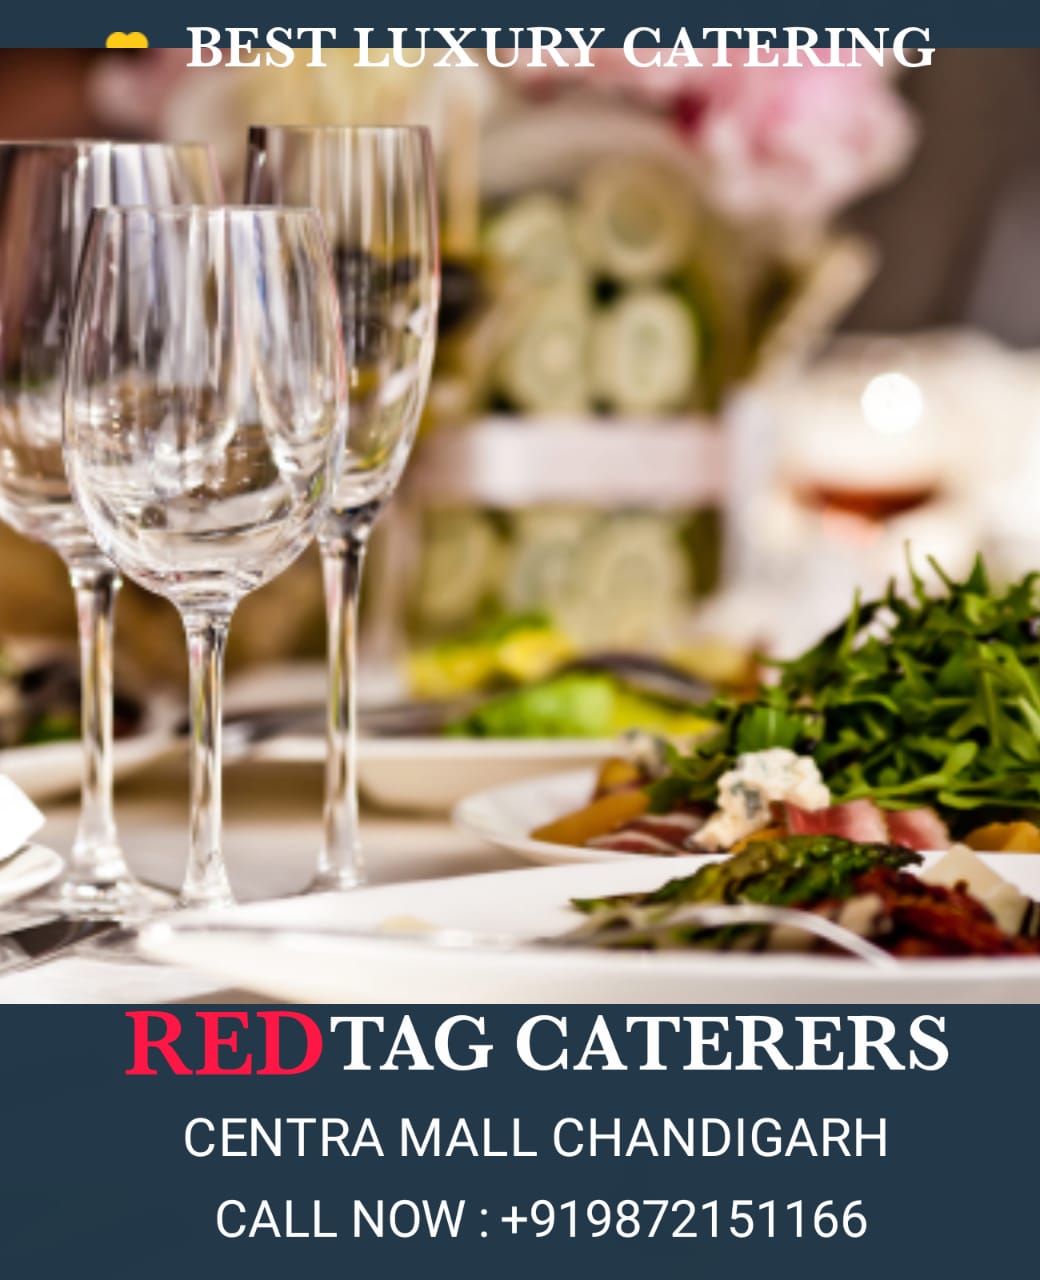 Affordable & perfect catering service in Mohali punjab. | Red Tag Caterers | Affordable catering service in Mohali punjab,amazing catering service in Mohali punjab, perfect catering service in Mohali punjab, experience catering service in Mohali punjab, best budget catering se - GL46764